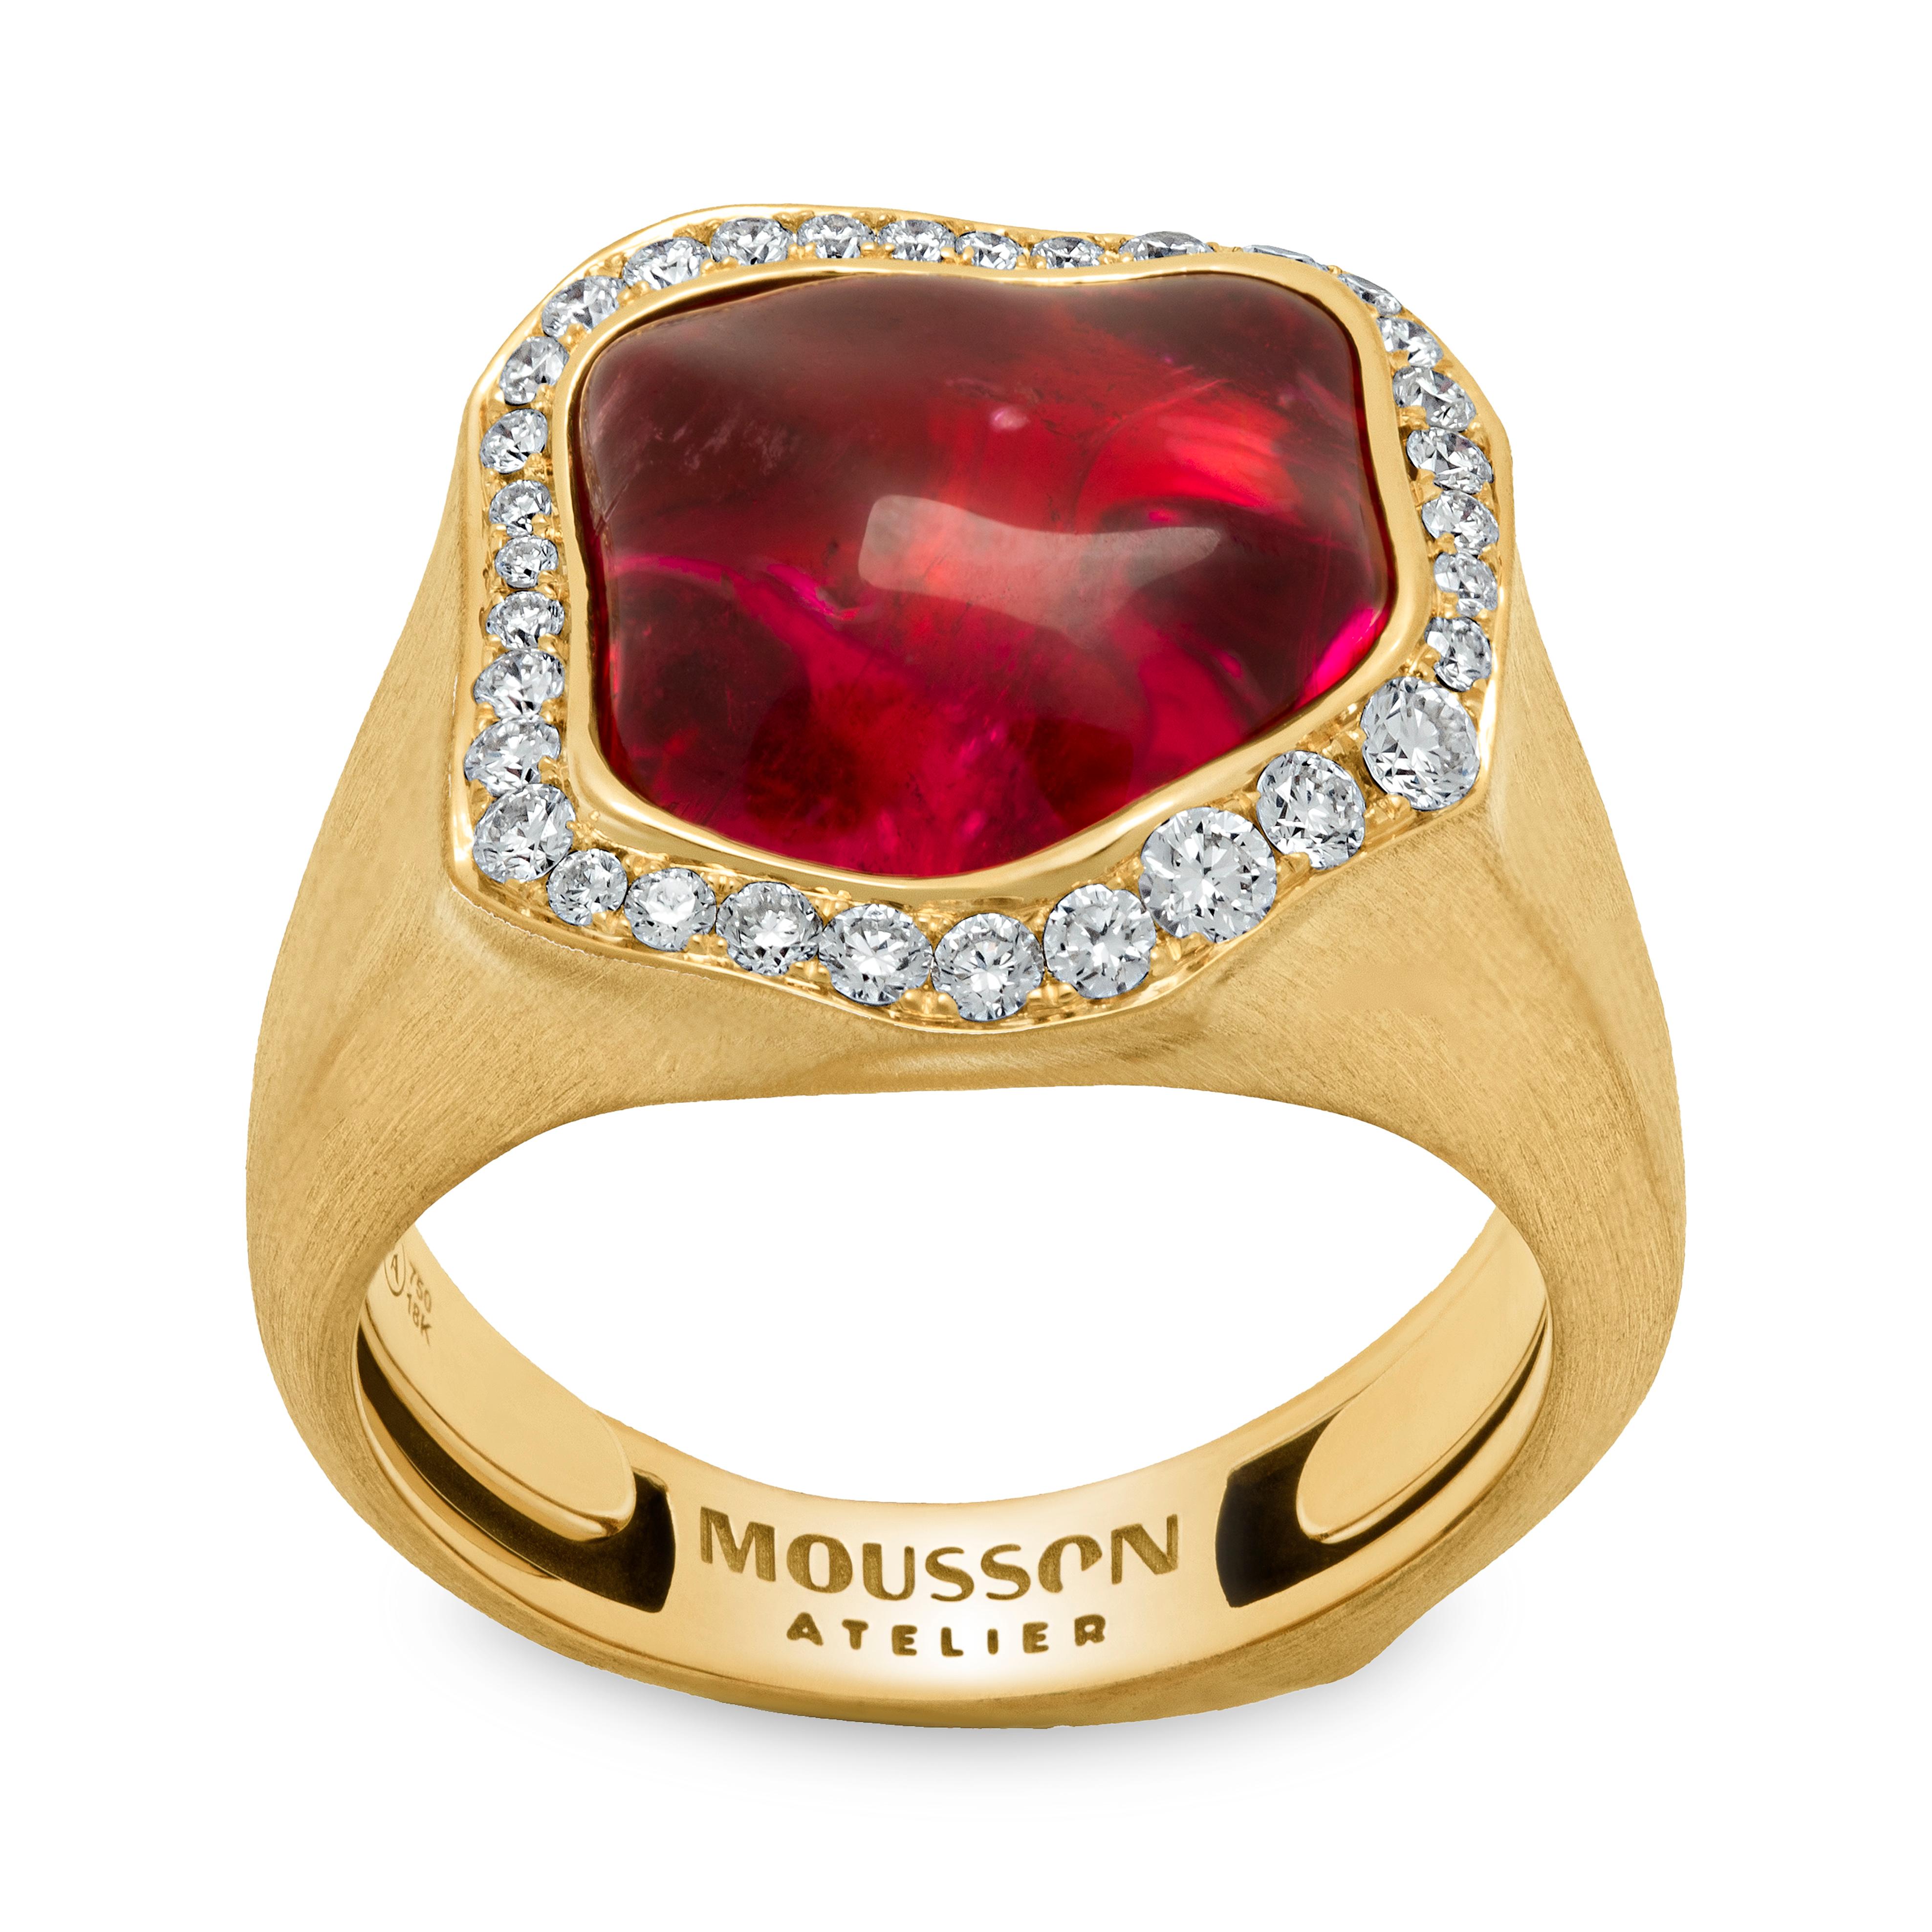 Rubellite Baroque 8.11 Carat Diamonds 18 Karat Yellow Matte Gold Spectrum Ring

A free-shape Rubellite cocktail ring, consisting of 8.11 ct Rubellite accompanied by White Diamonds in 18 Karat Yellow Matte Gold. Newcomer in Spectrum collection. An